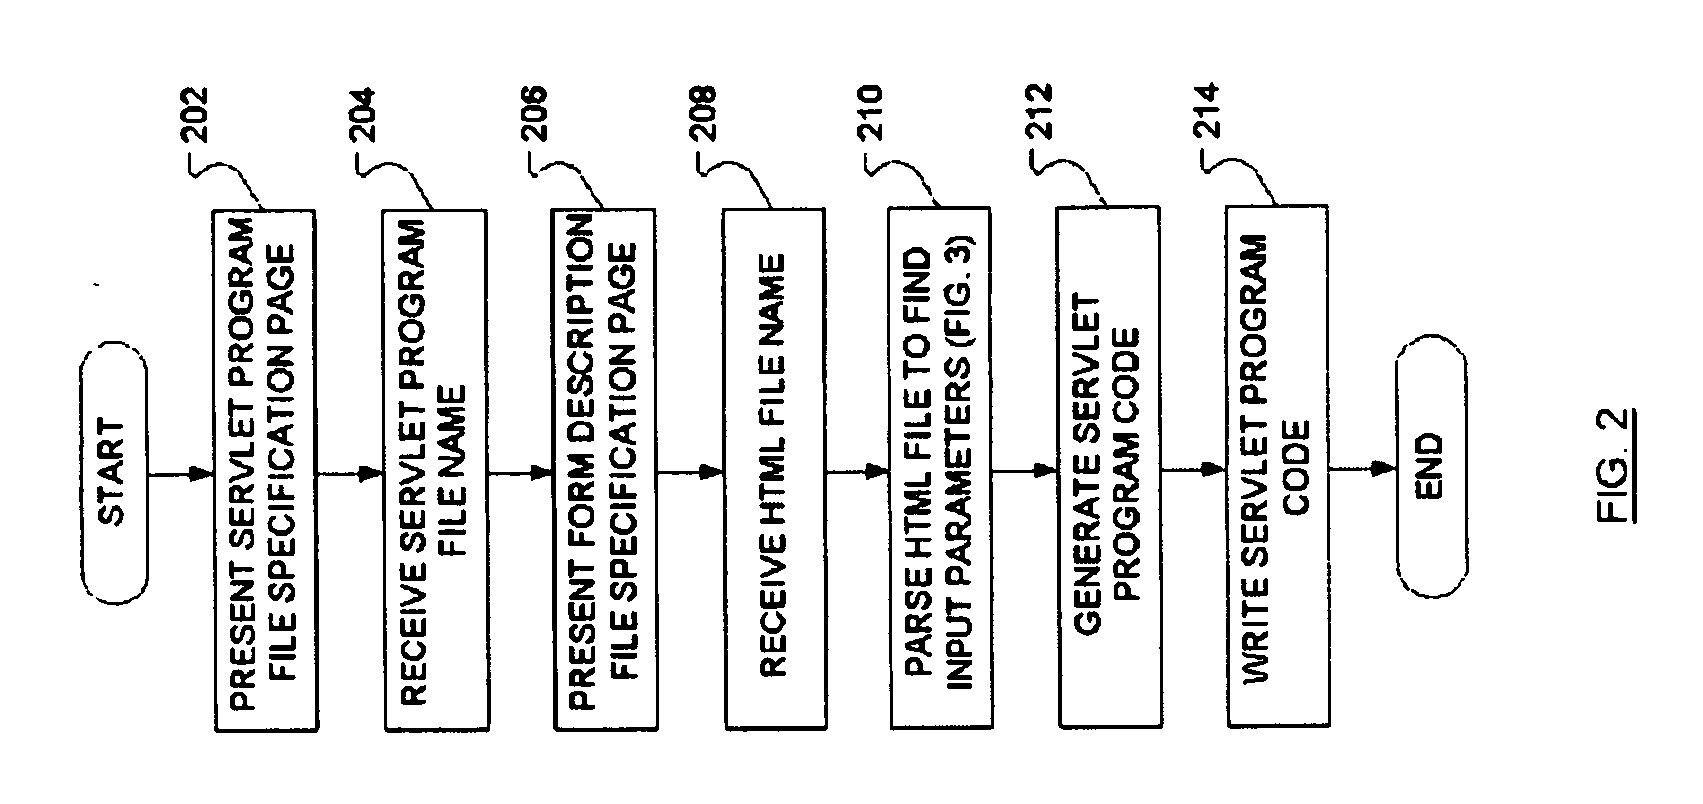 Method to reduce input parameter interface error and inconsistency for servlets